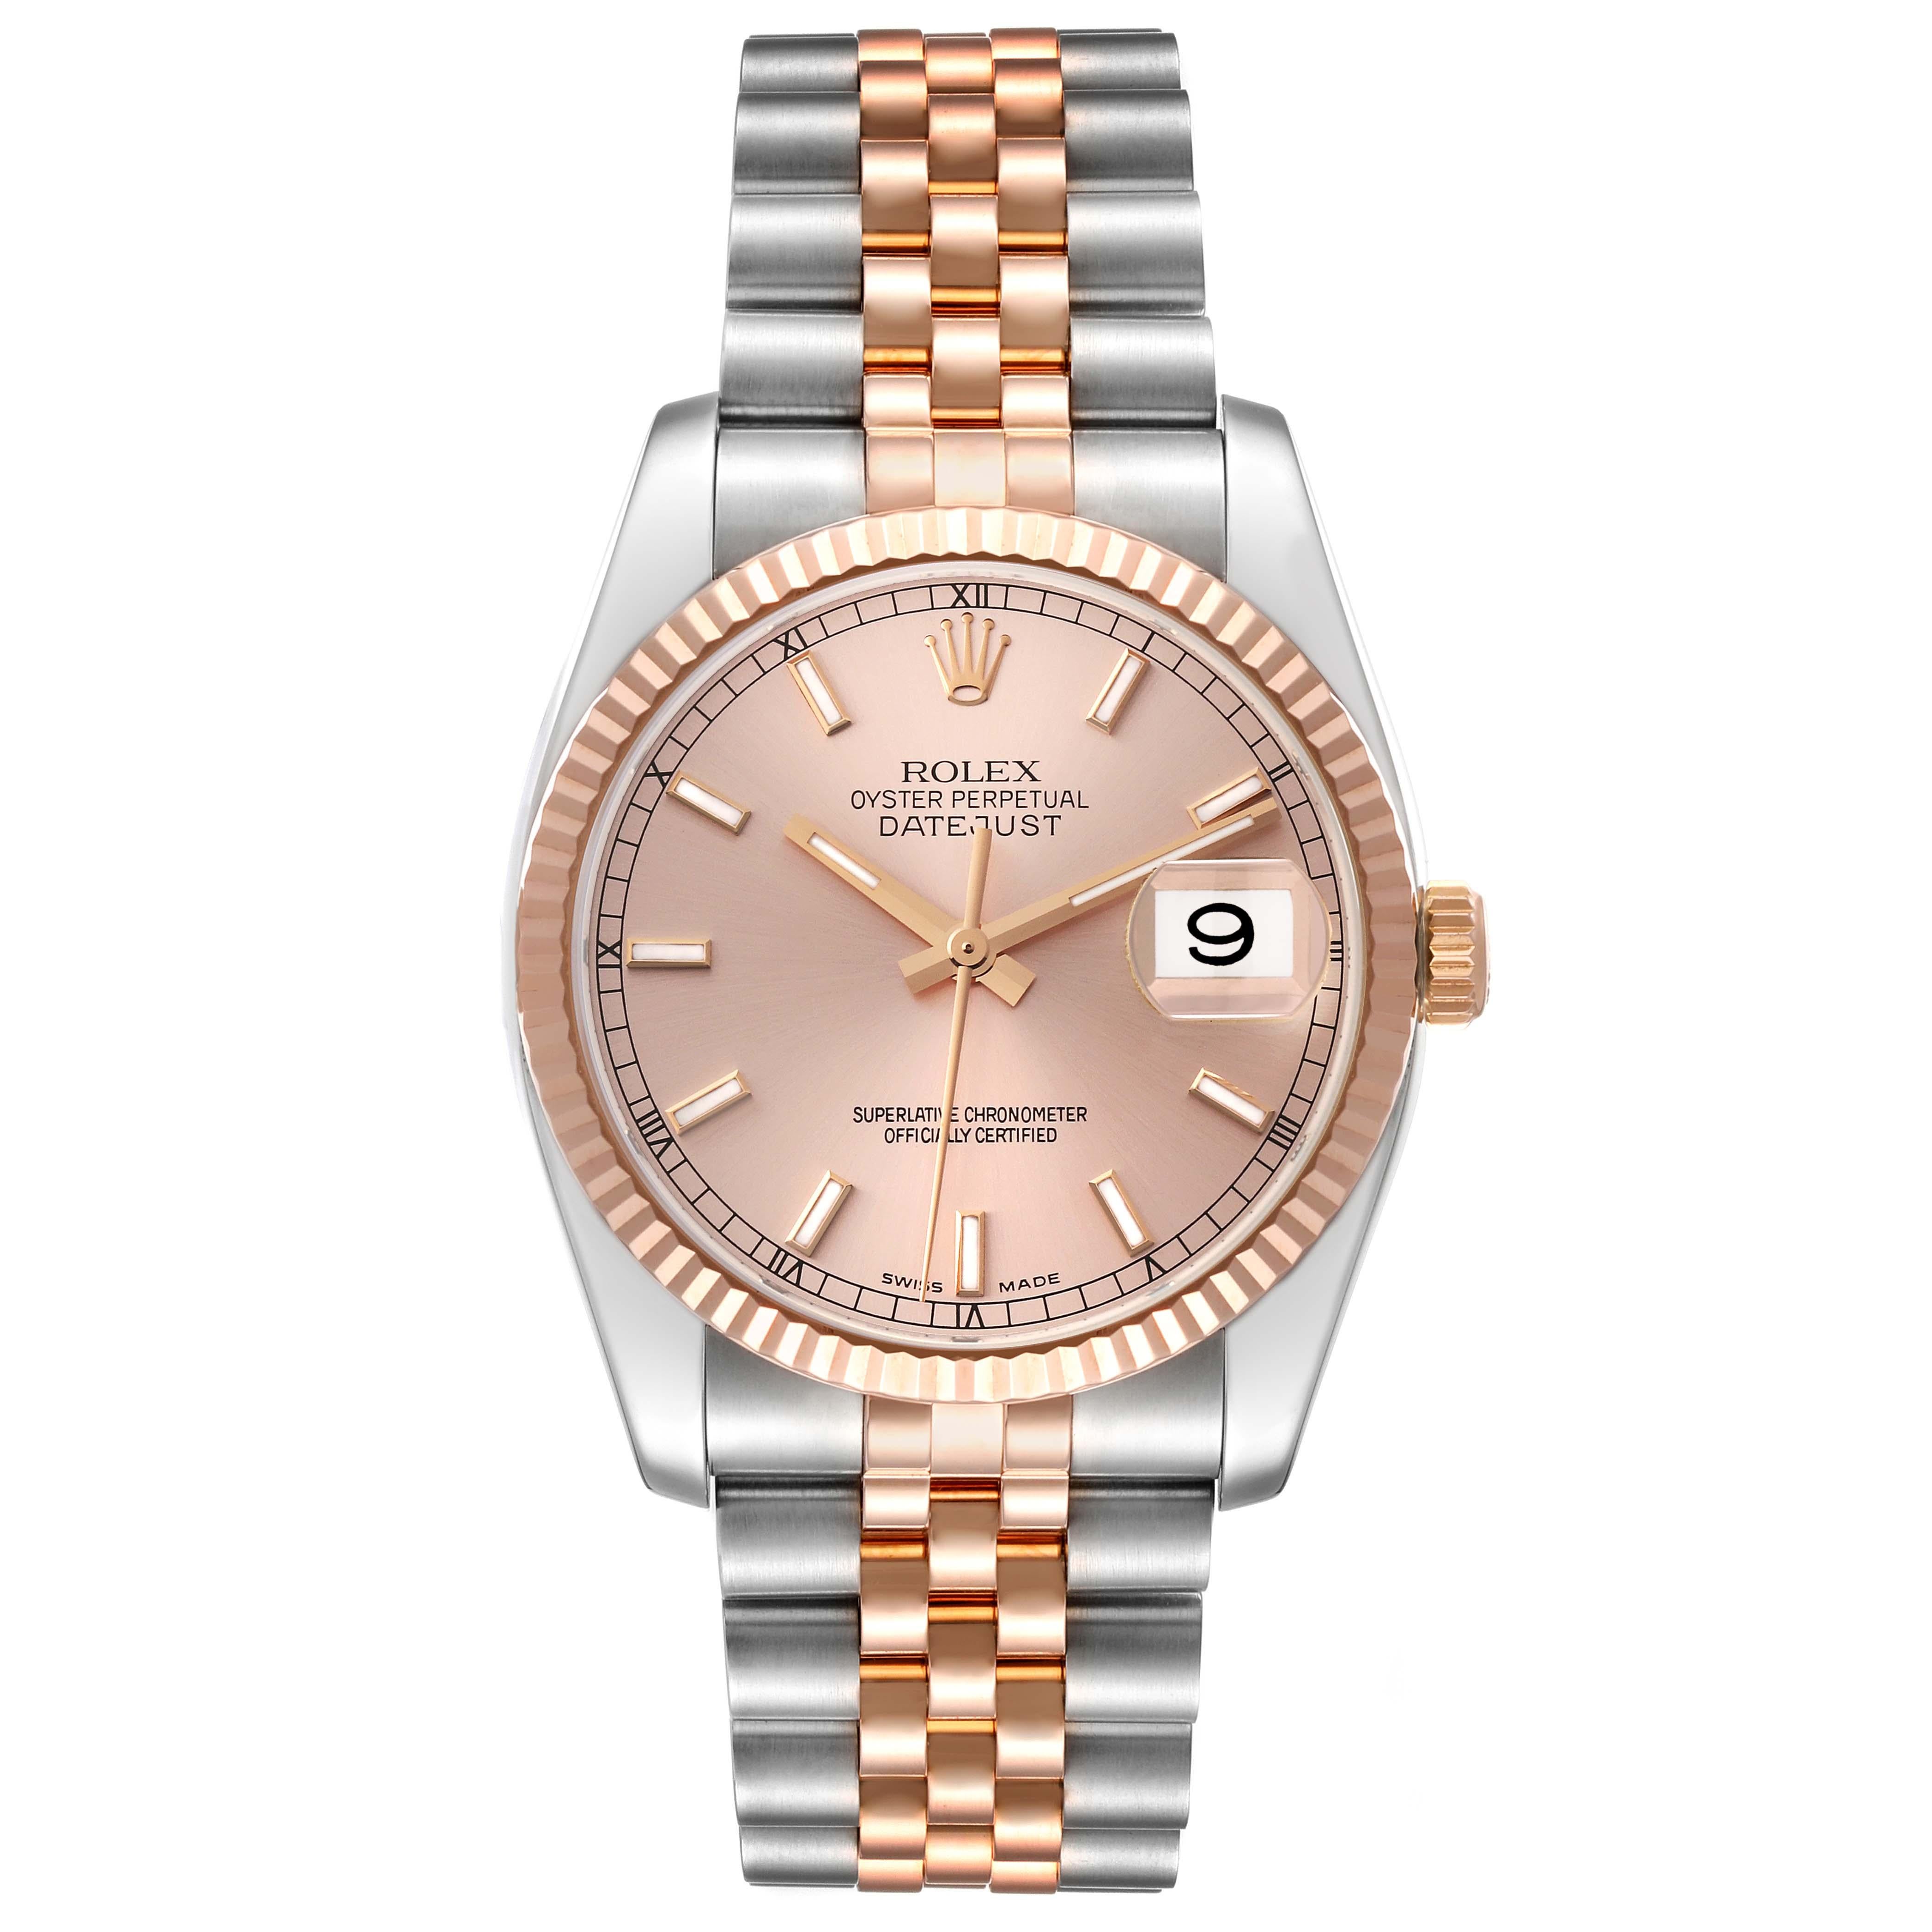 Rolex Datejust Steel Rose Gold Pink Dial Mens Watch 116231 Box Papers en vente 4